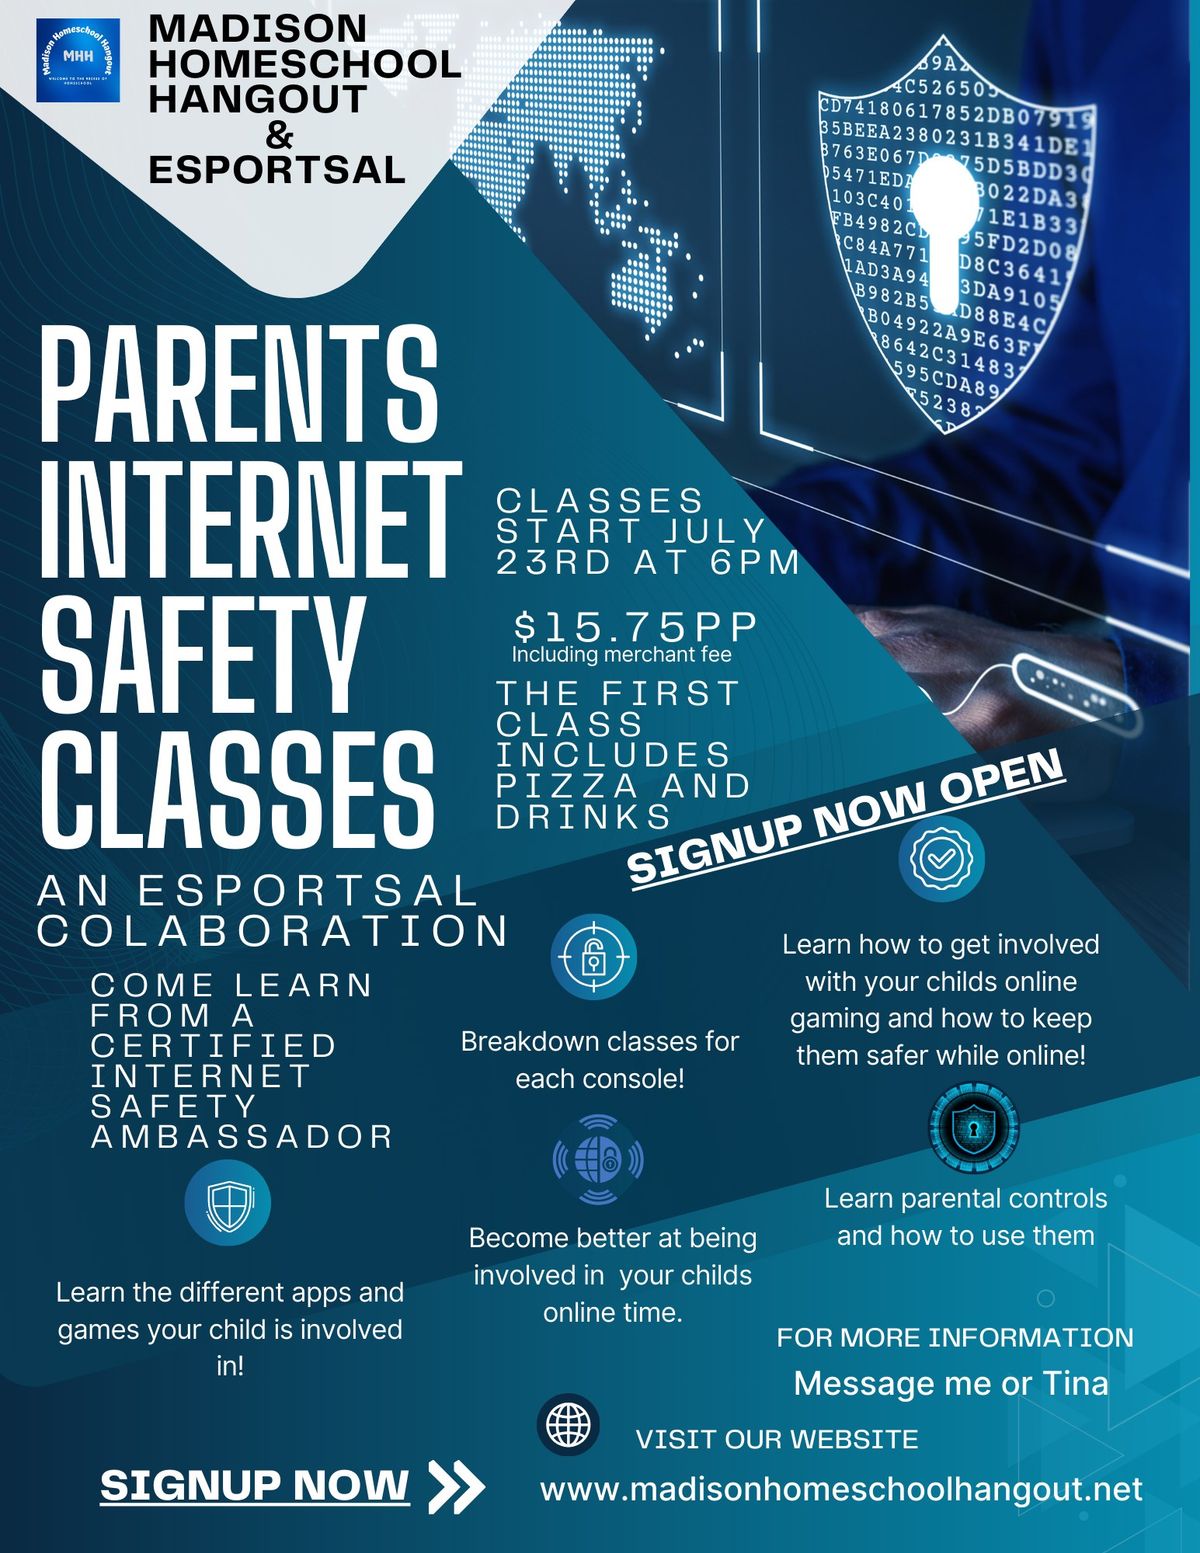 Guardian Internet Safety Classes